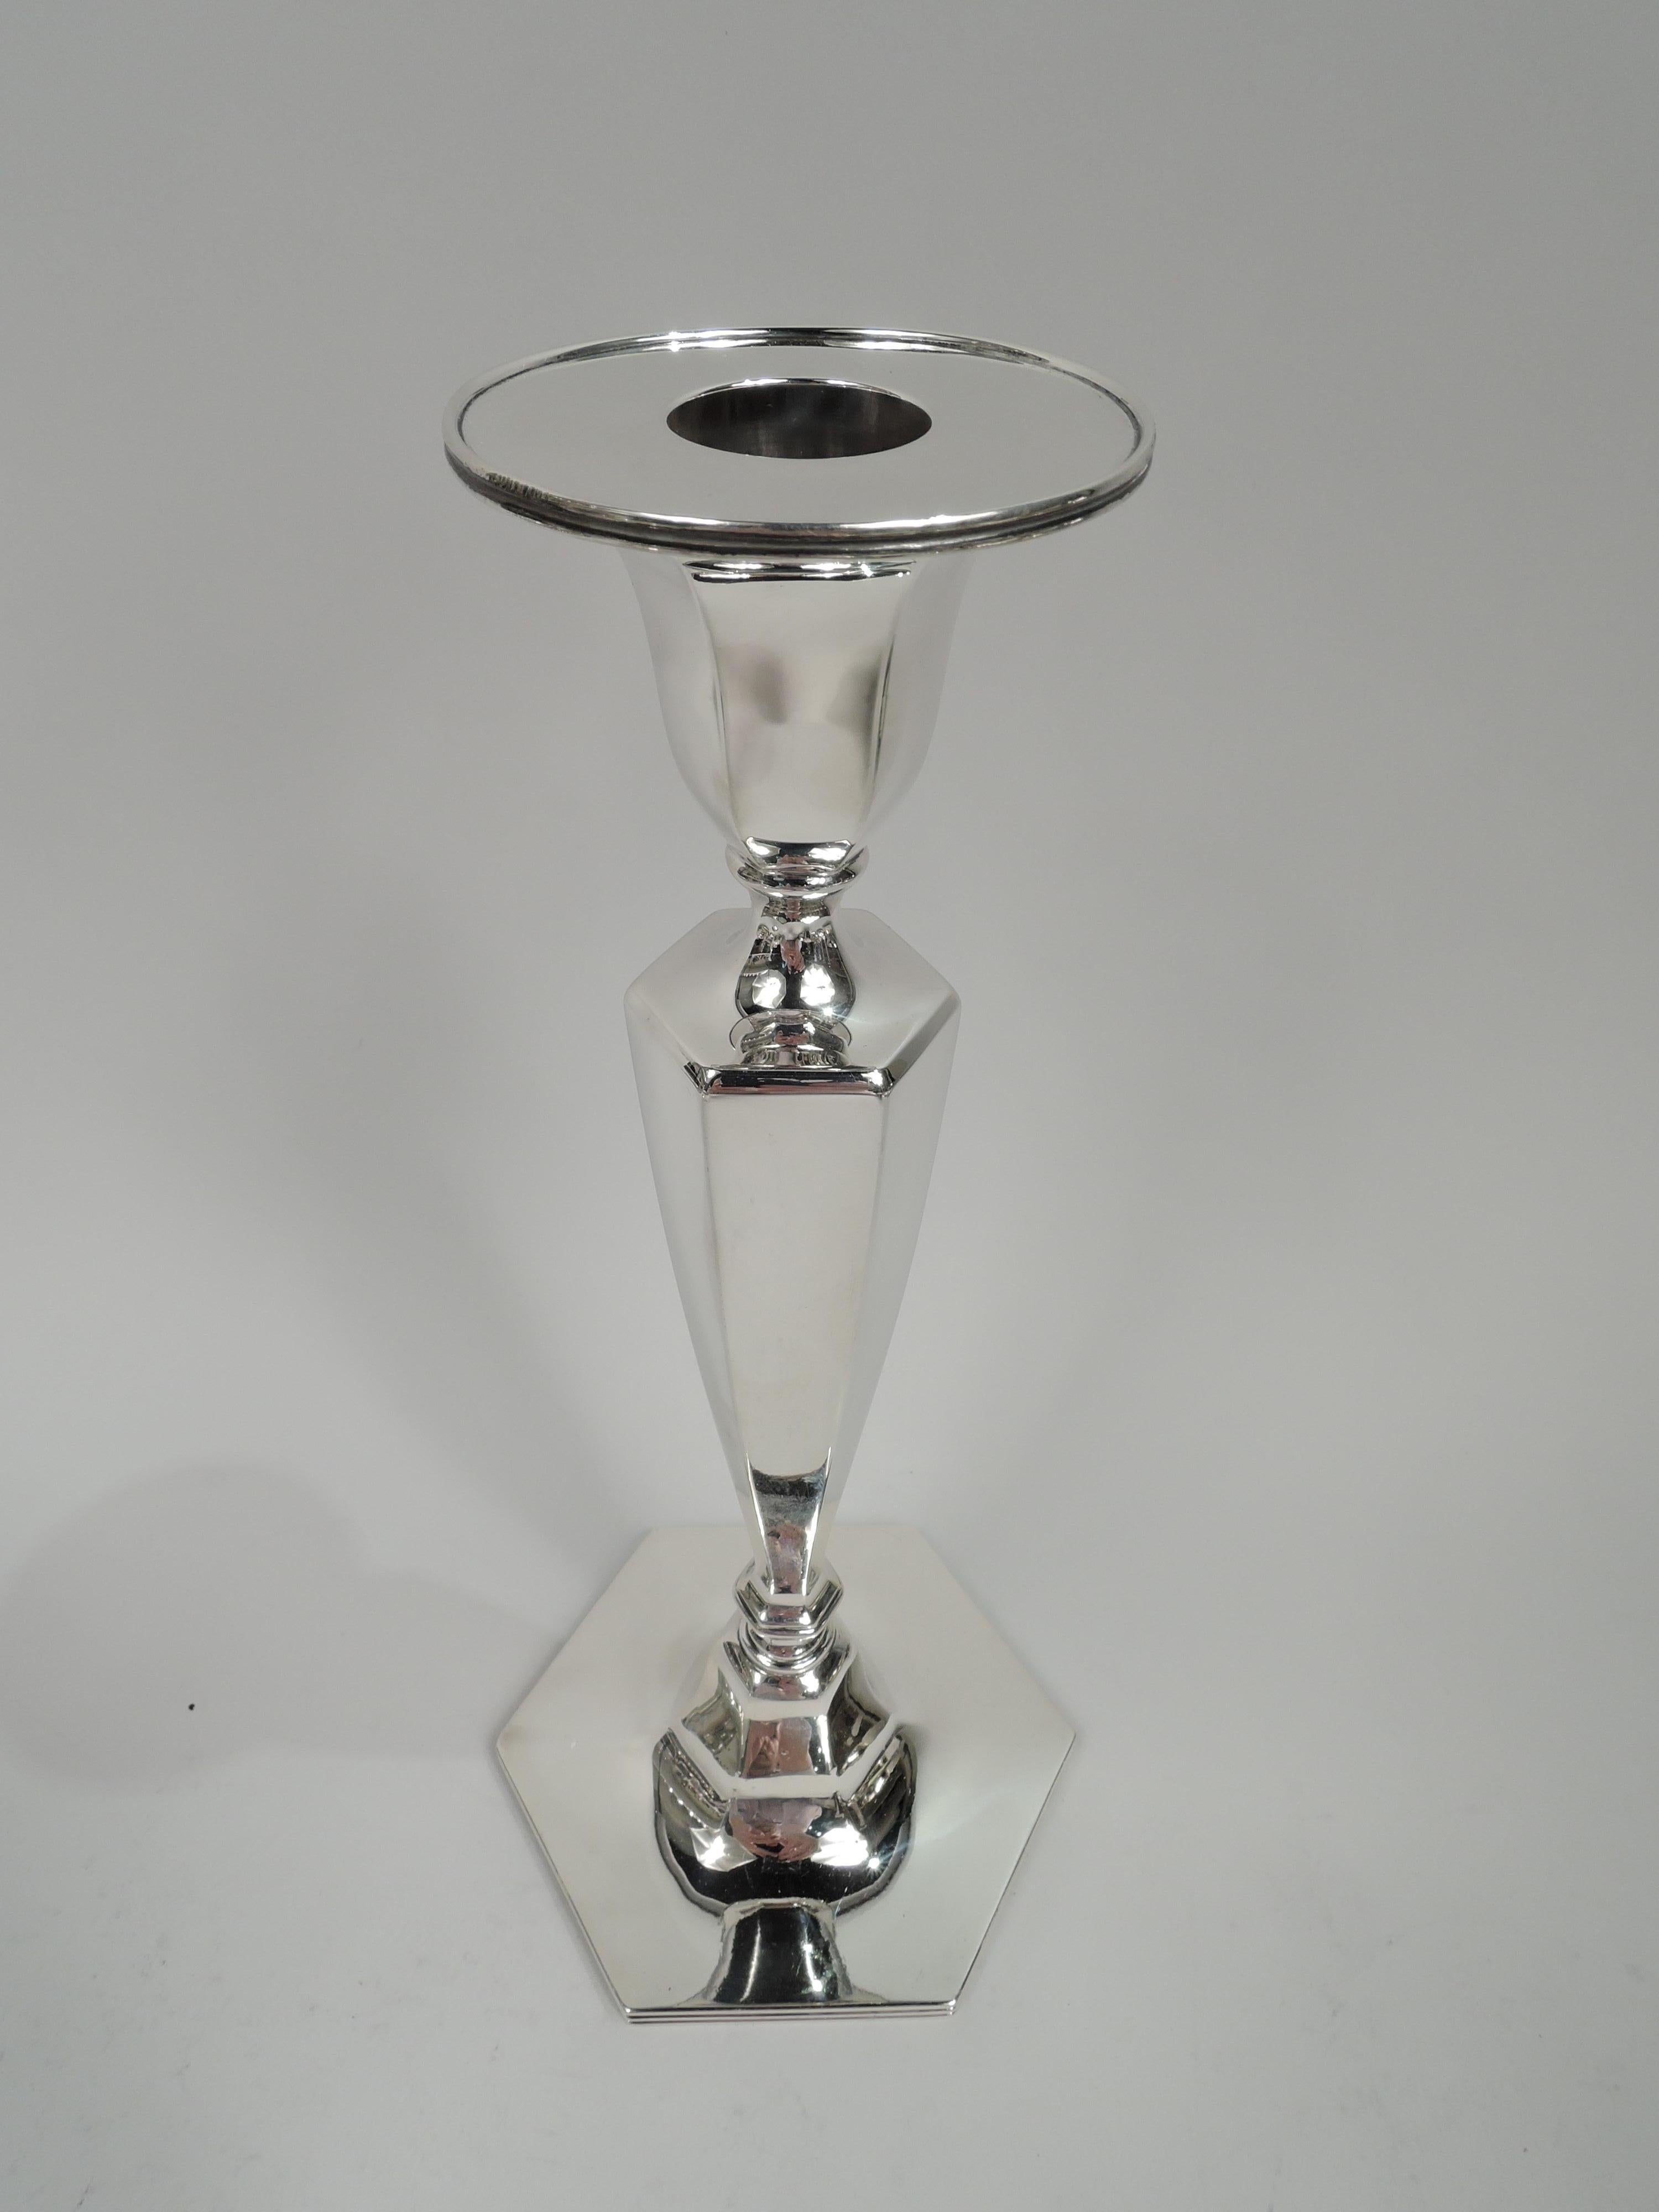 Pair of Modern Georgian sterling silver candlesticks. Made by Tiffany & Co. in New York, ca 1910. Each: Tapering and hexagonal shaft on raised hexagonal foot. Socket same with round detachable bobeche. Bobeche and foot rim reeded. Fully marked